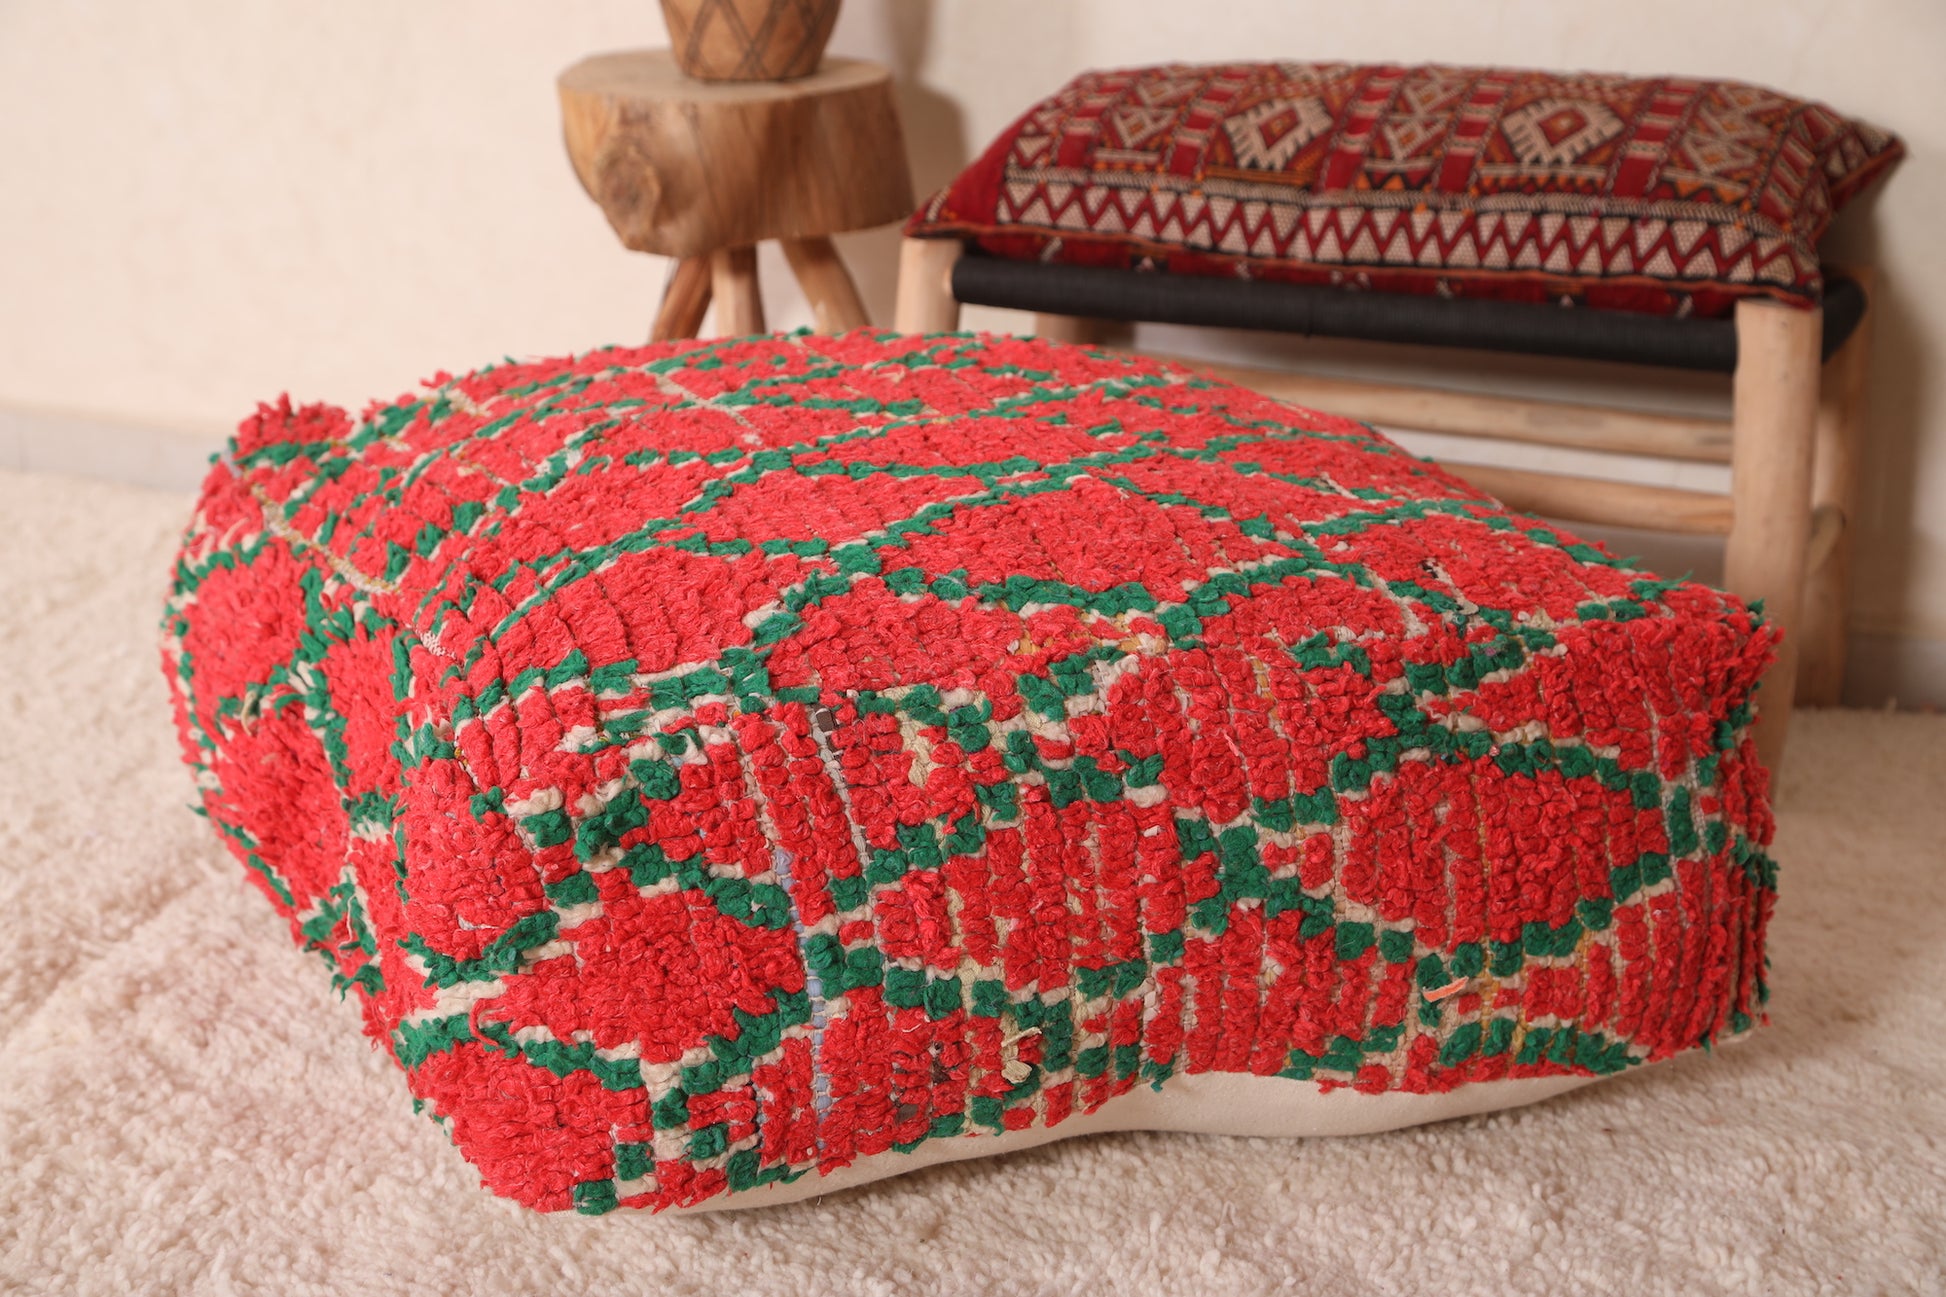 Moroccan red Pouf Cushion for Home Decor